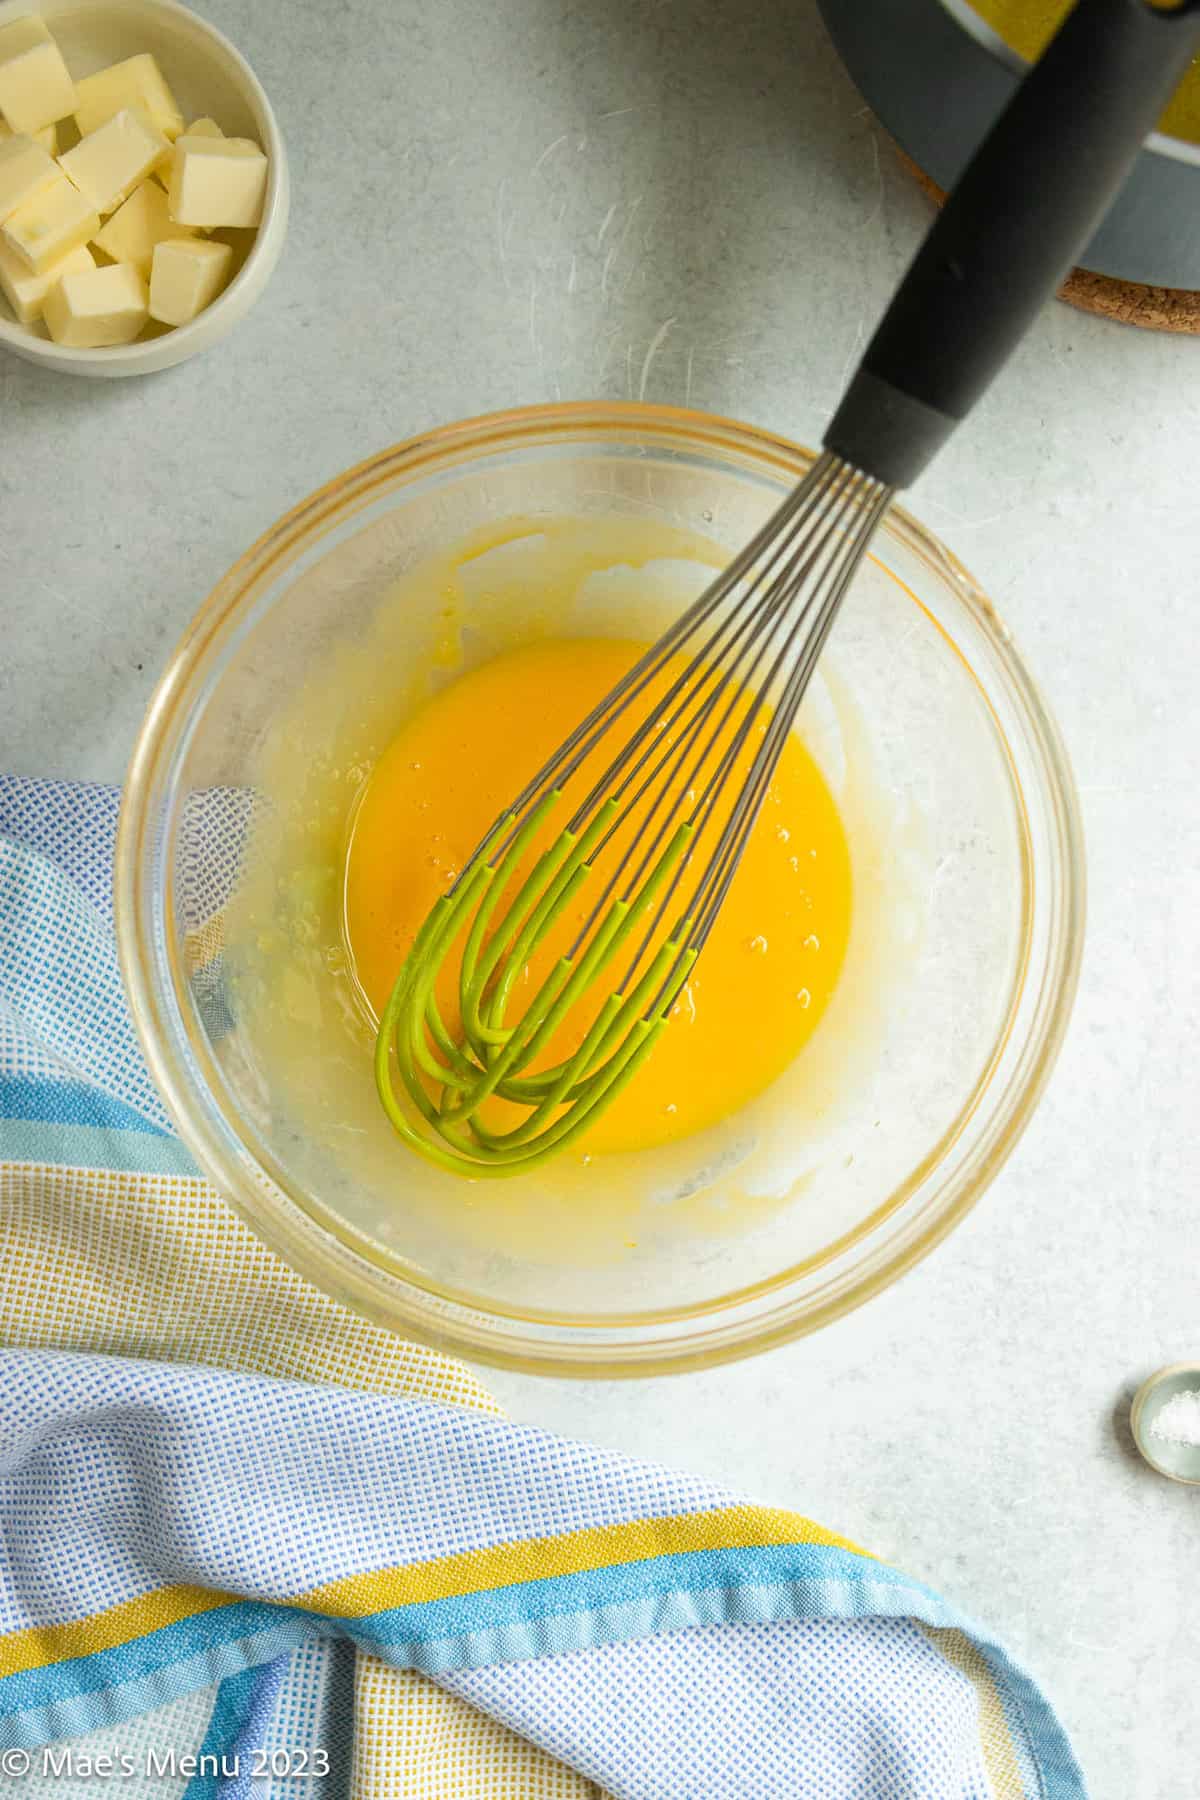 Whisked egg yolks in a glass bowl.